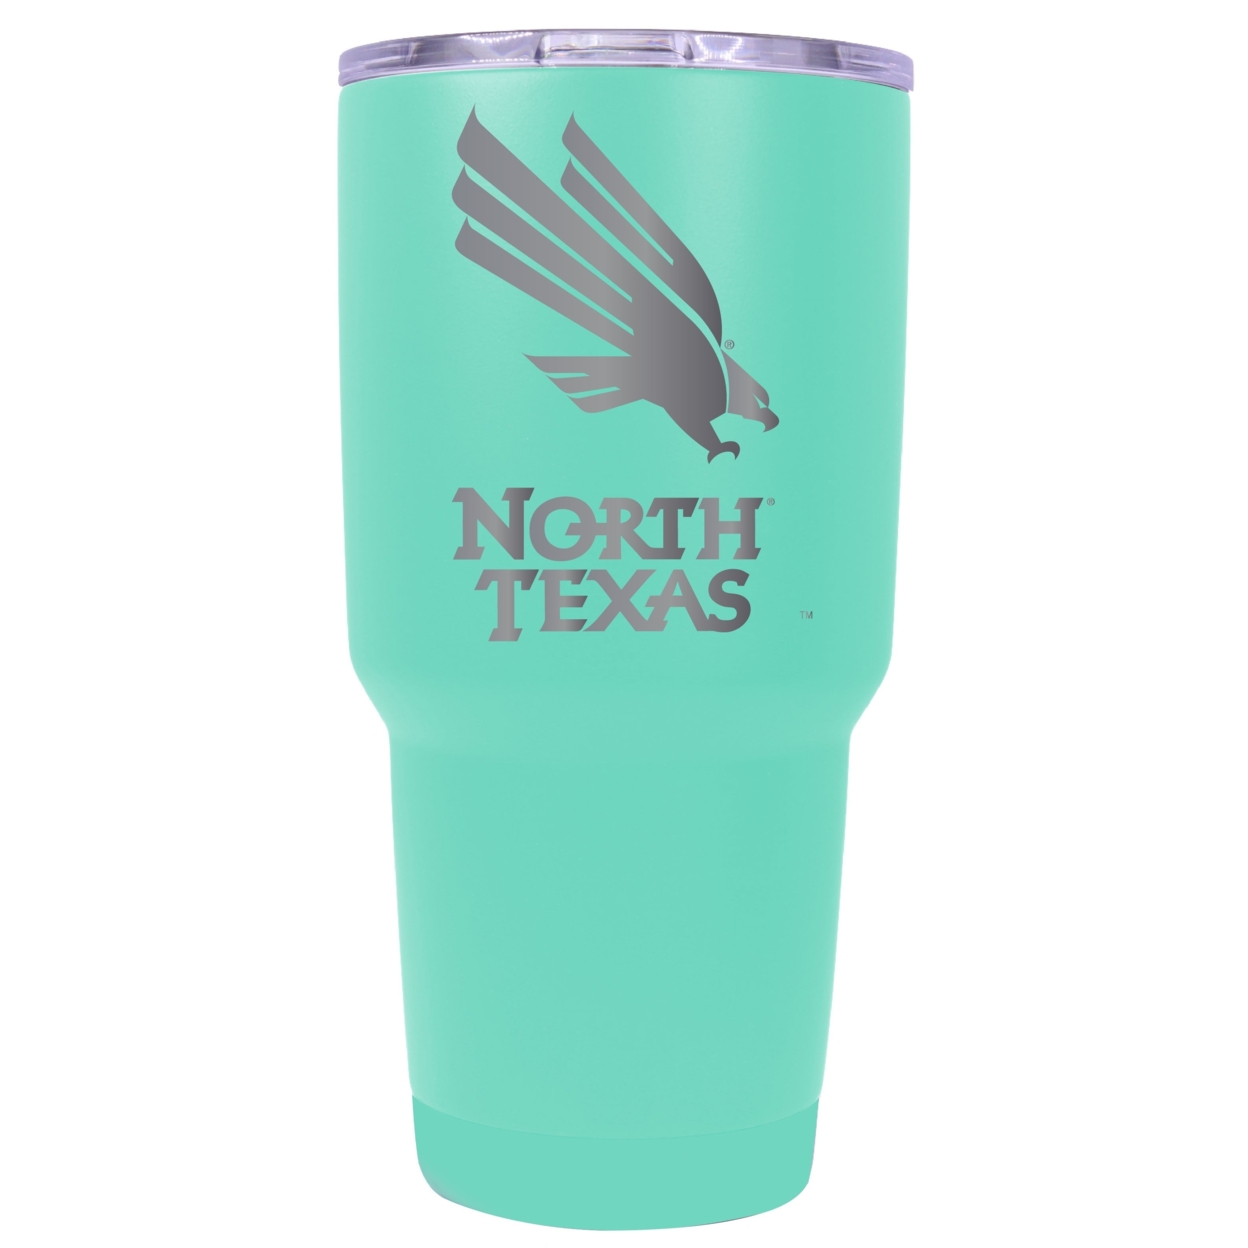 North Texas 24 Oz Laser Engraved Stainless Steel Insulated Tumbler - Choose Your Color. - Seafoam